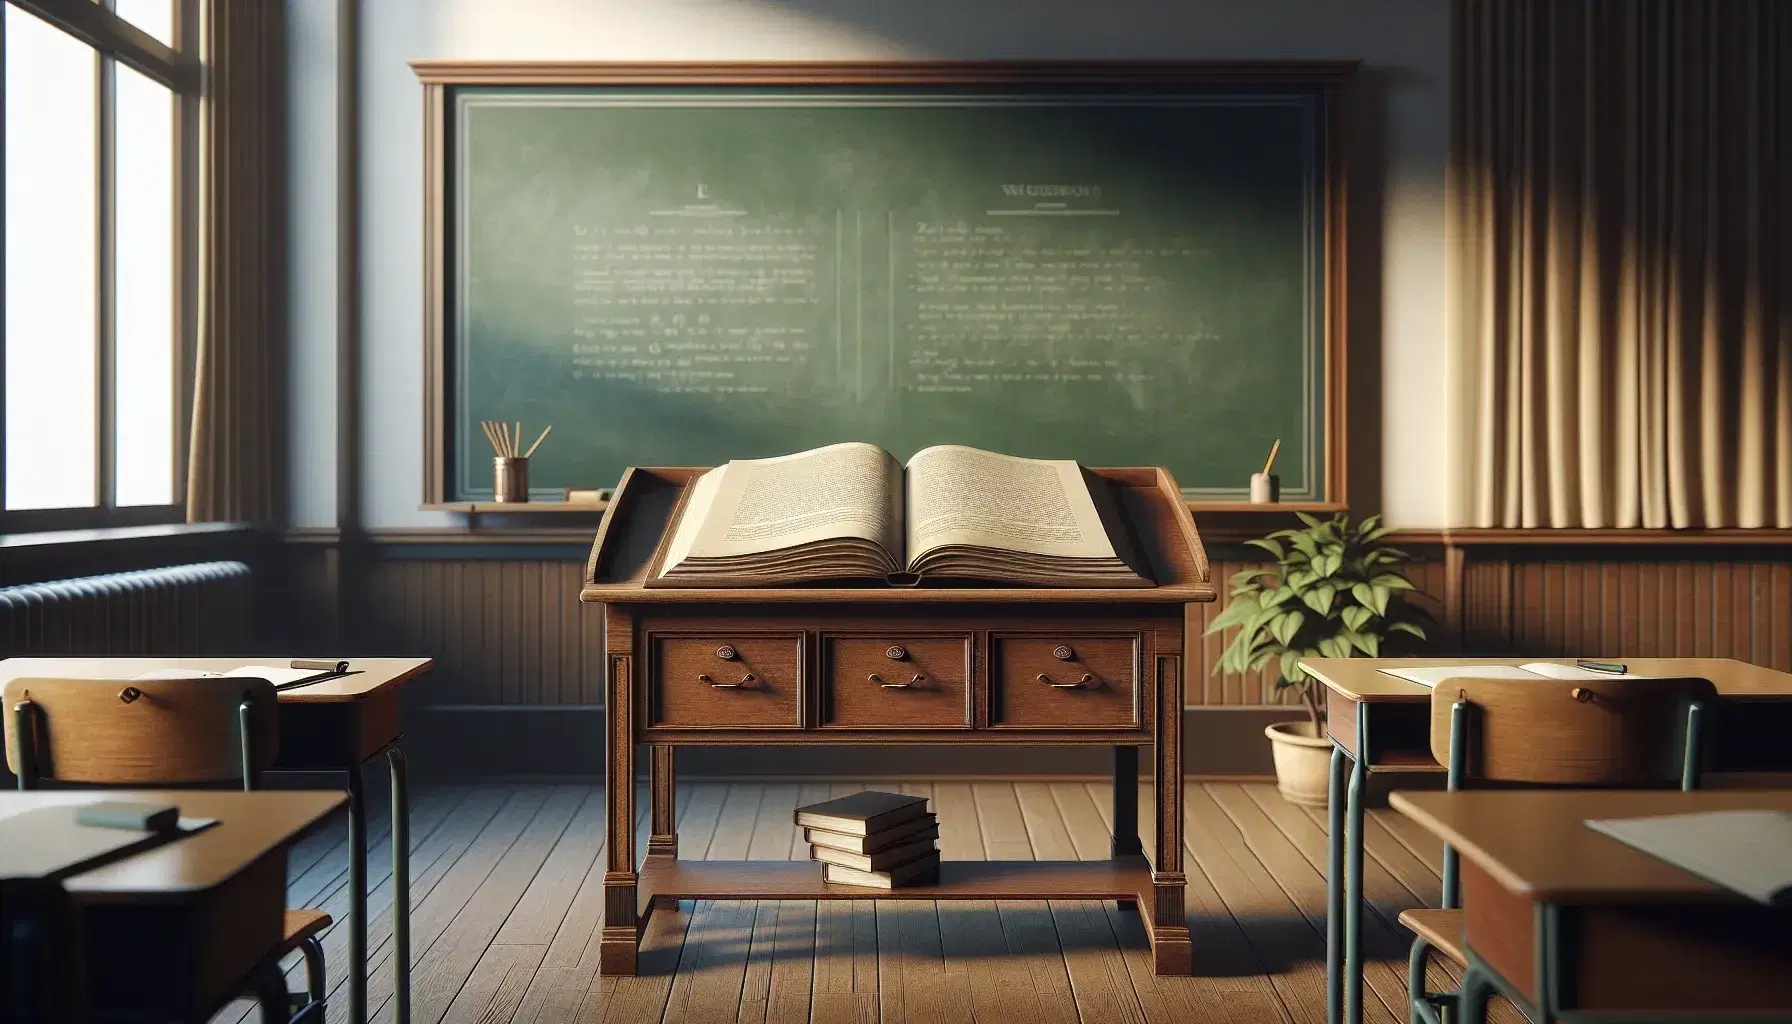 Traditional classroom with a wooden teacher's desk, open book, clean chalkboard, student desk with notebook and pencil, and a potted plant by the window.